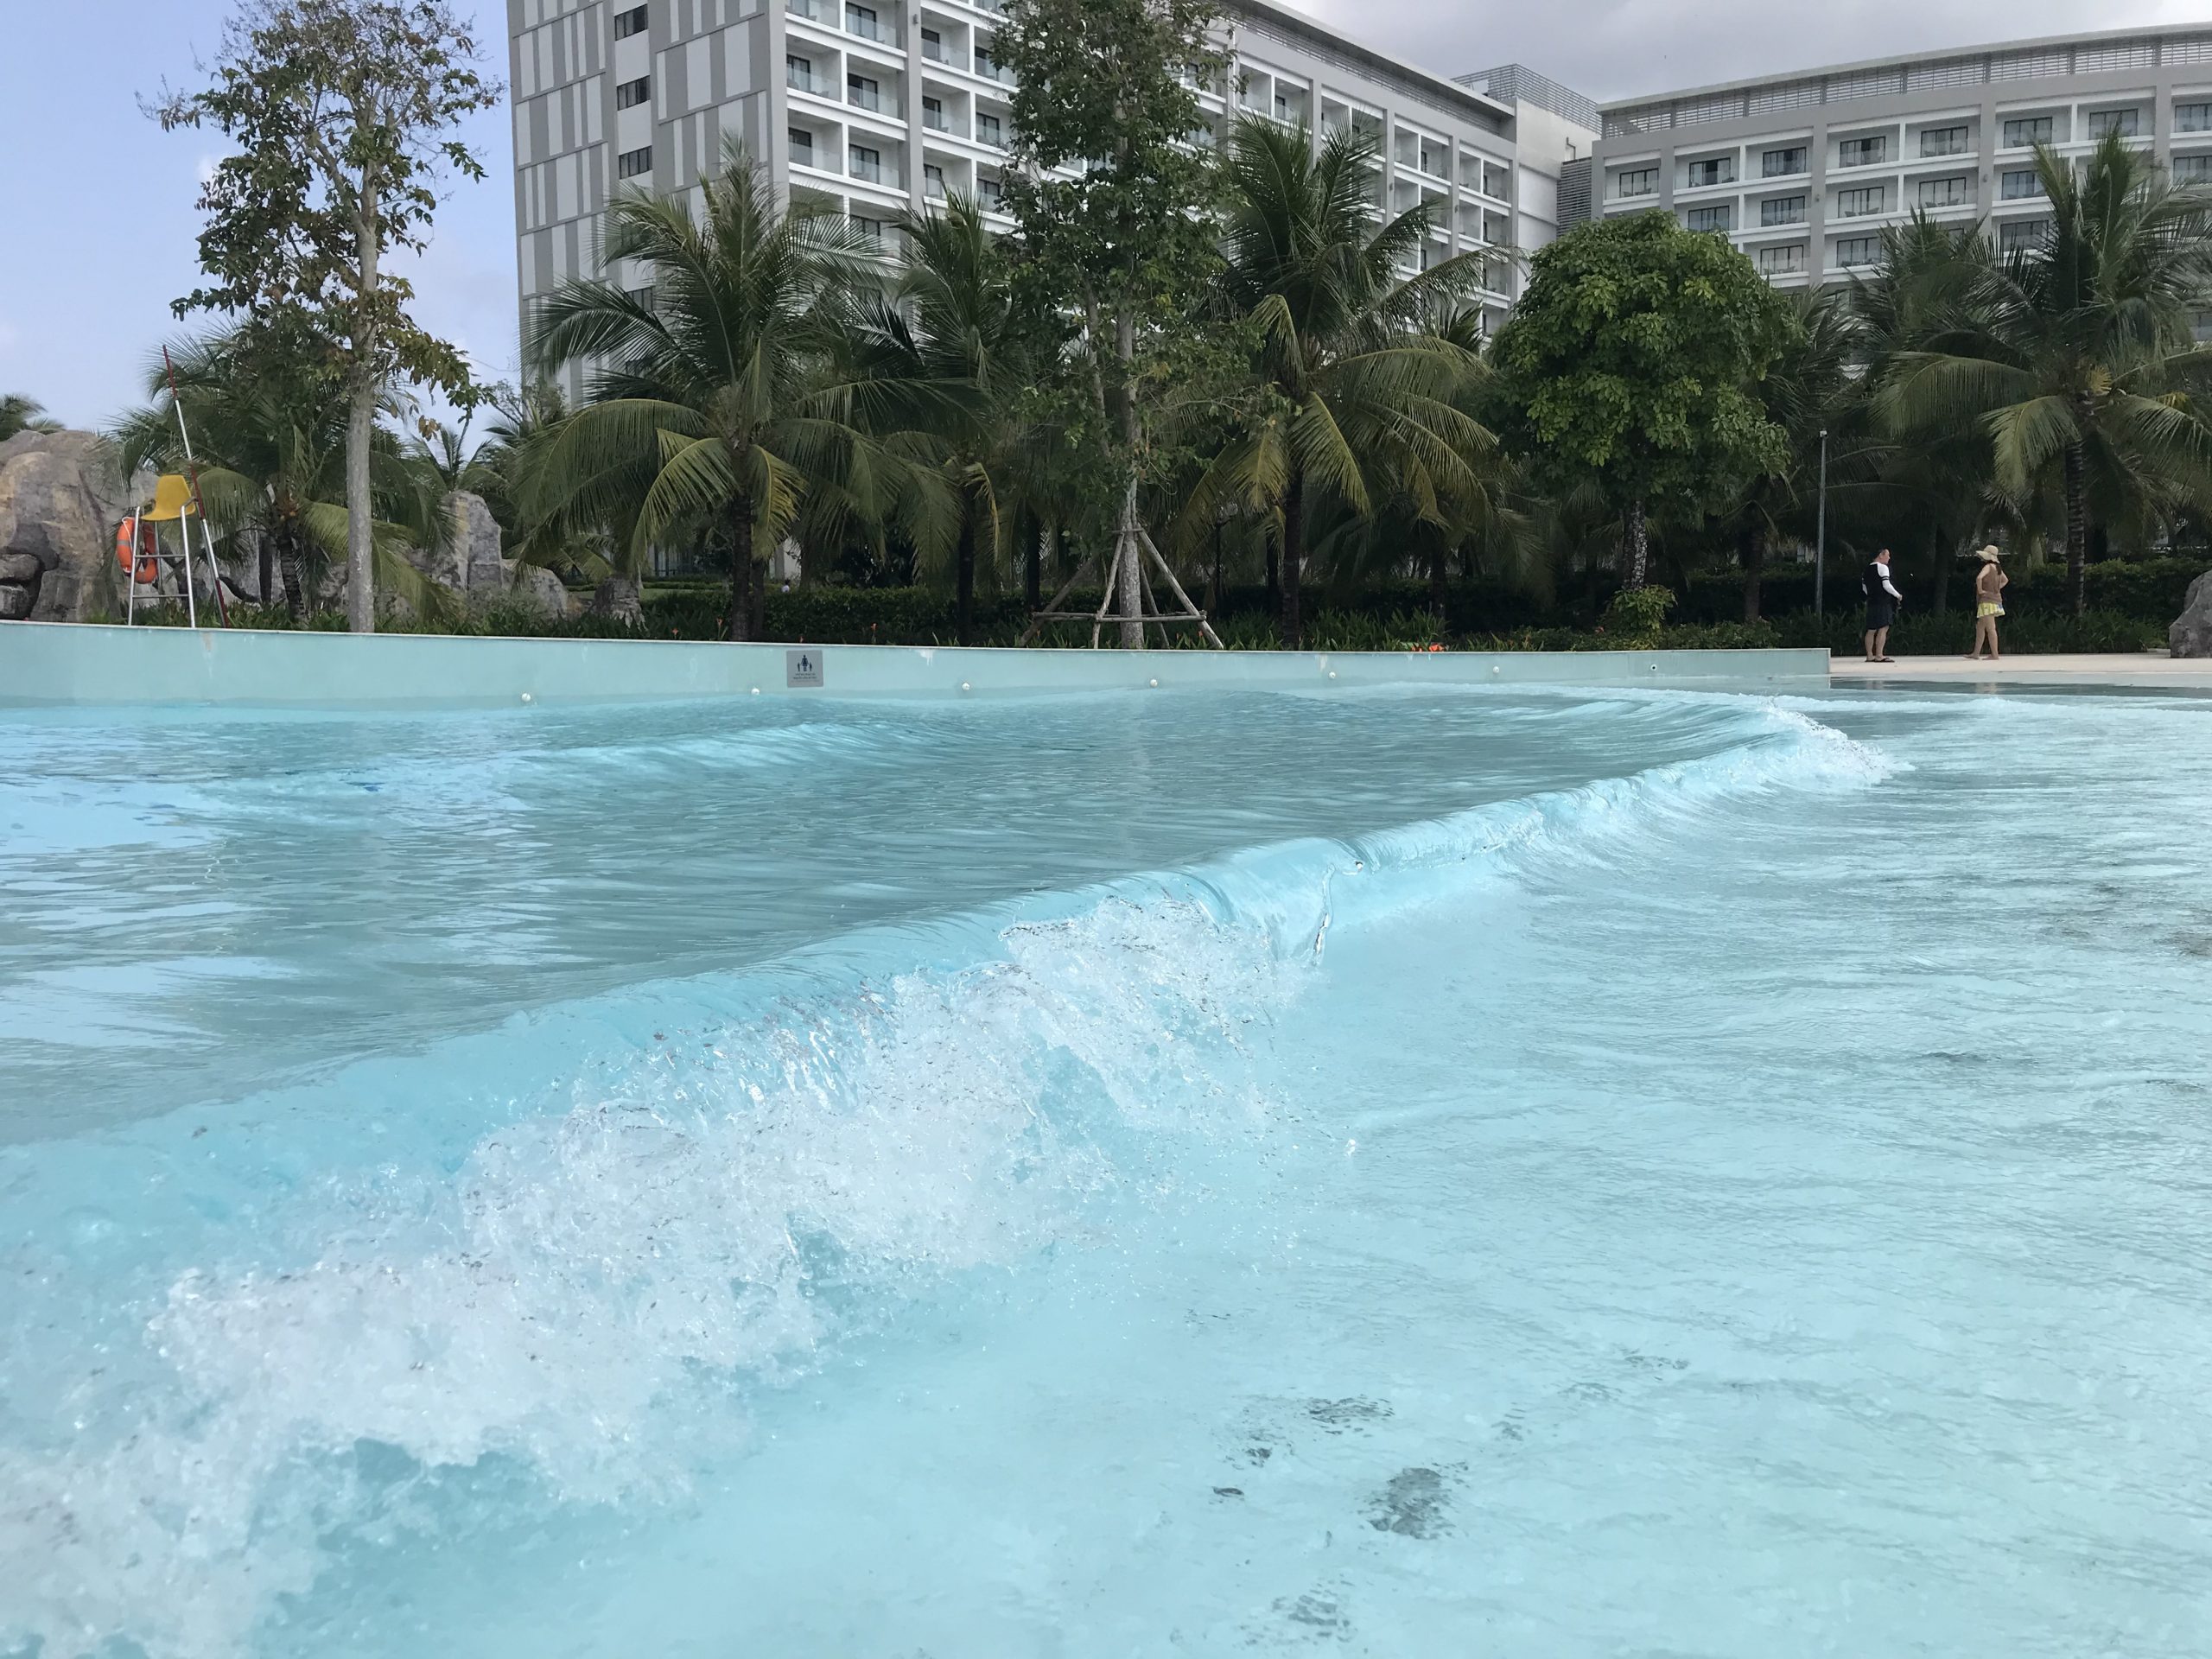 Phu Quoc 2019 Day 7 - Vinpearl Land and Waterpark - Singapore Travel Blog